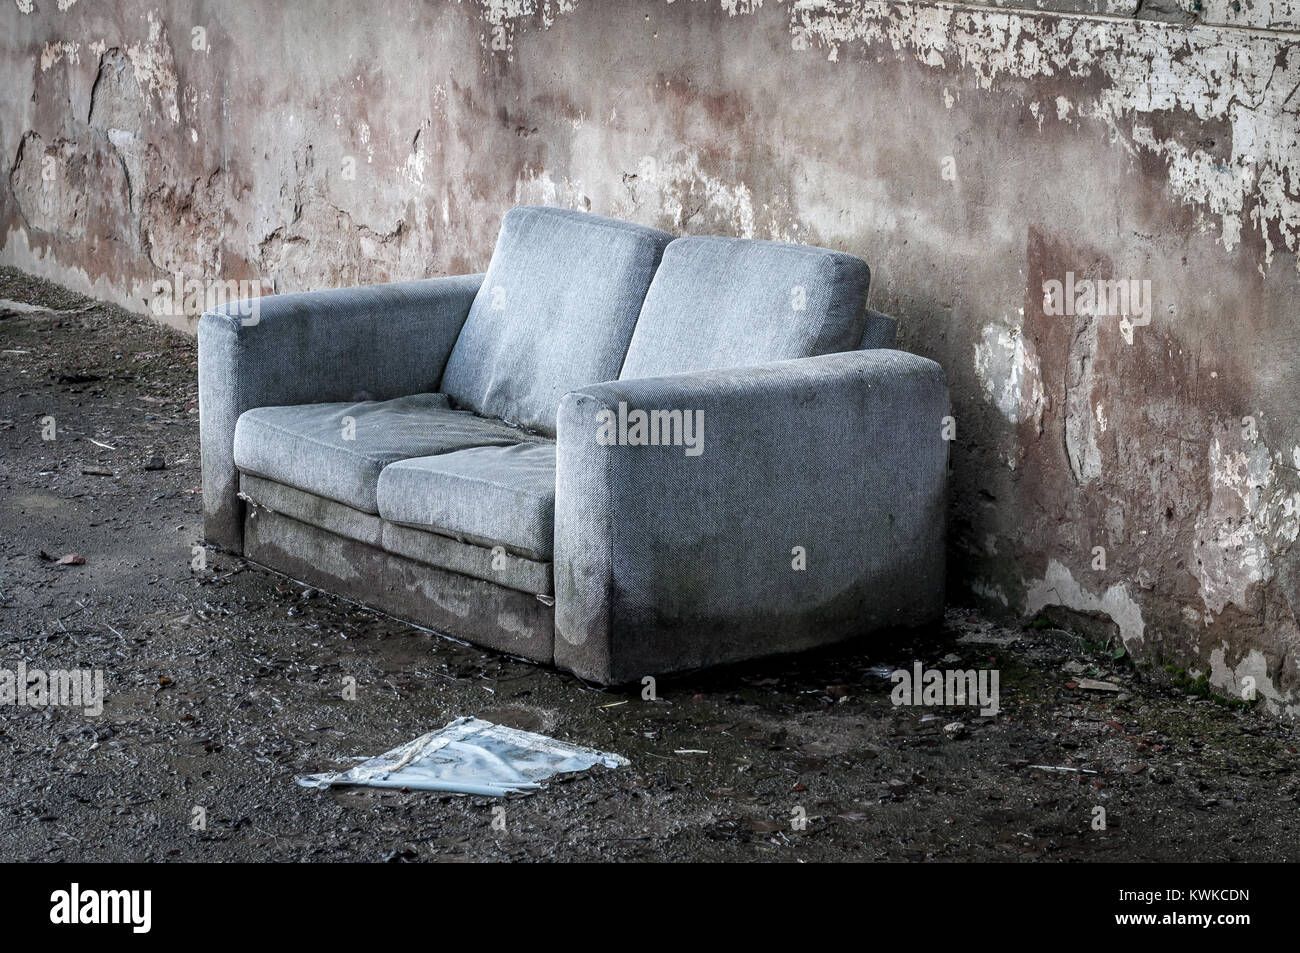 Old couch wet and destroyed Stock Photo - Alamy